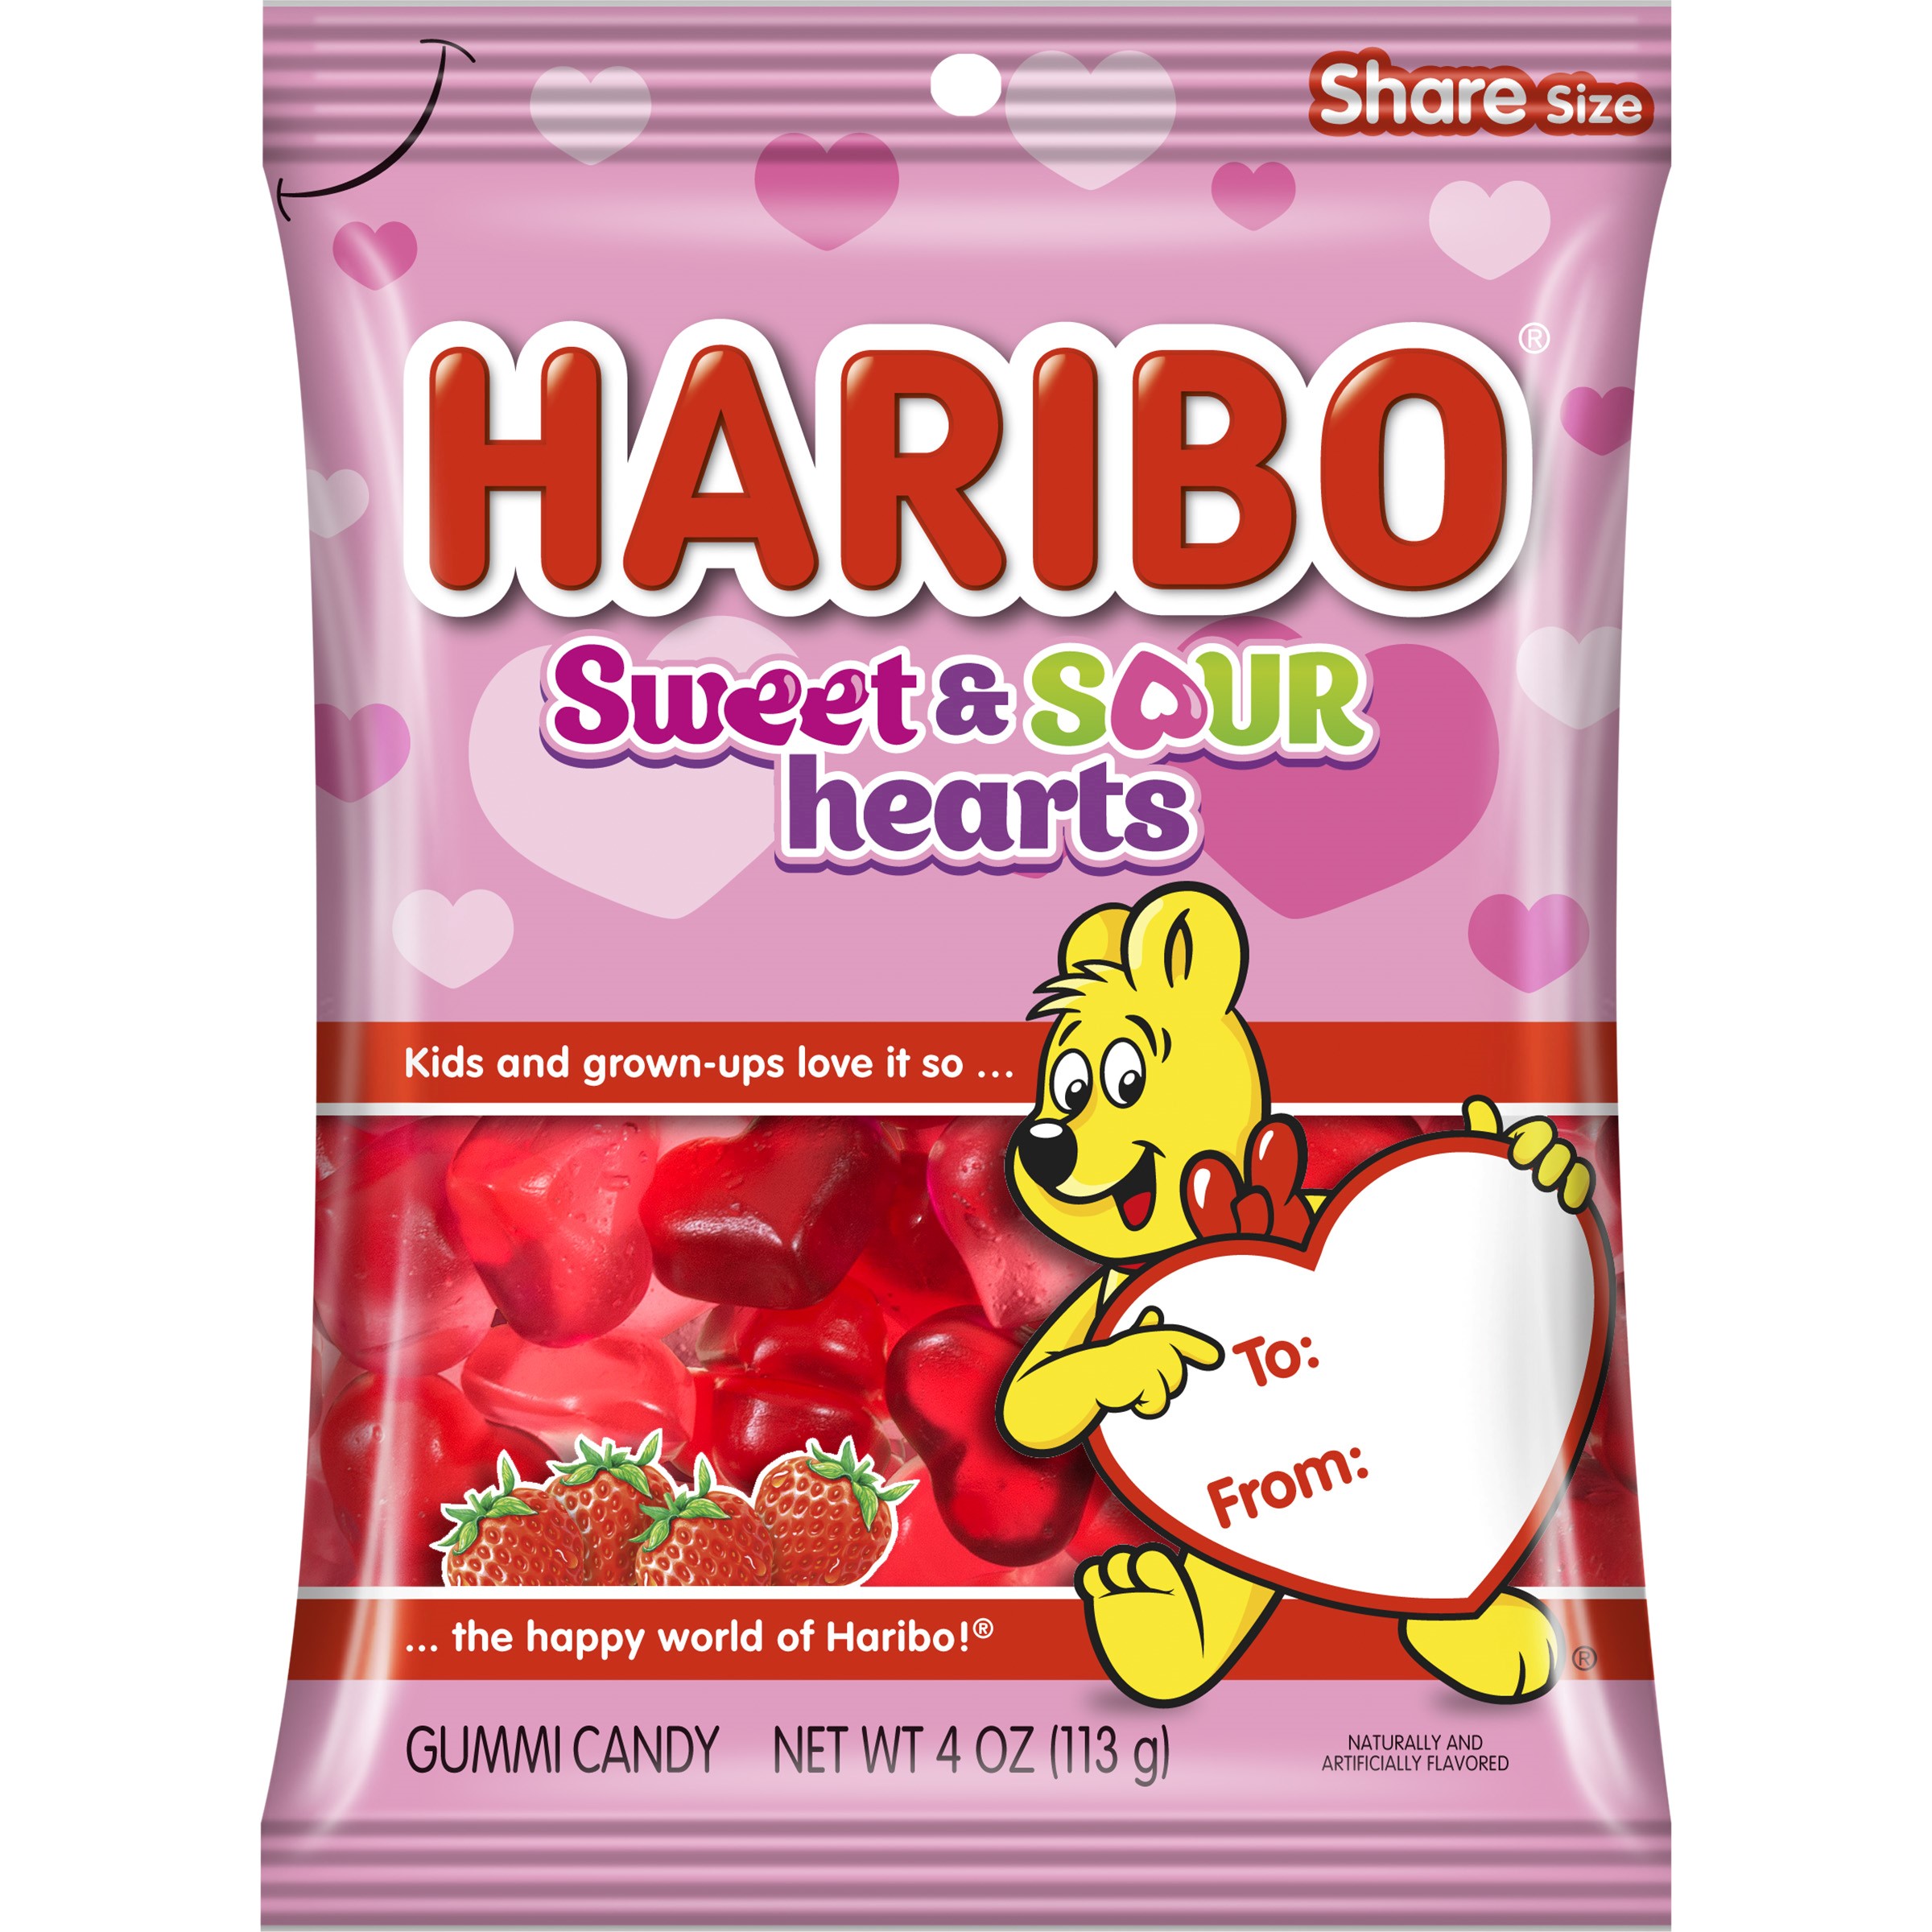 Haribo Valentine's Sweet and Sour Hearts - 4oz - image 2 of 6